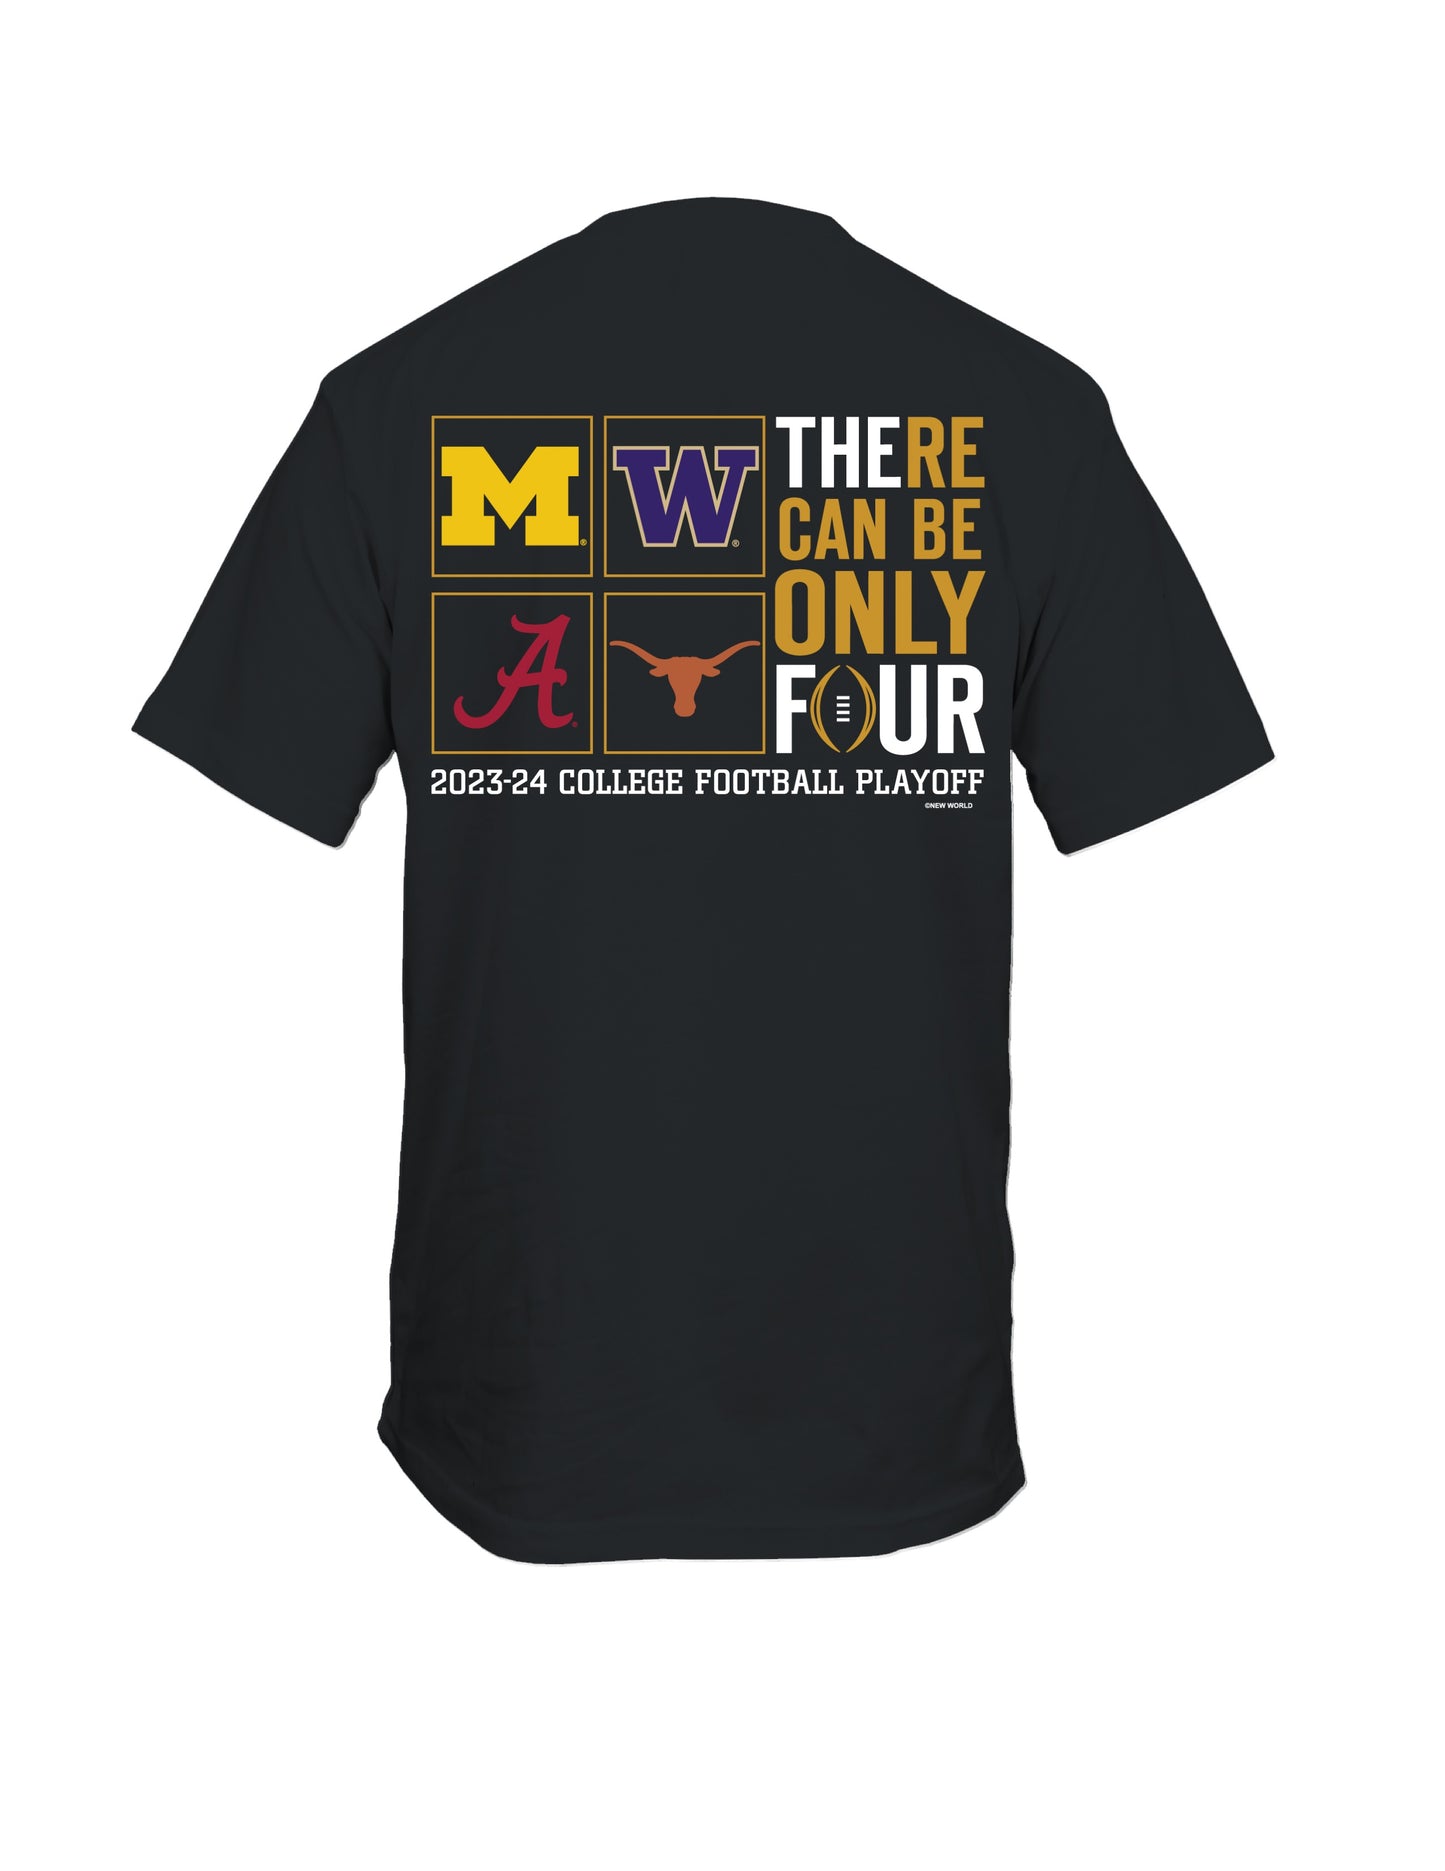 2023-24 College Playoff There Can Only Be Four Tee